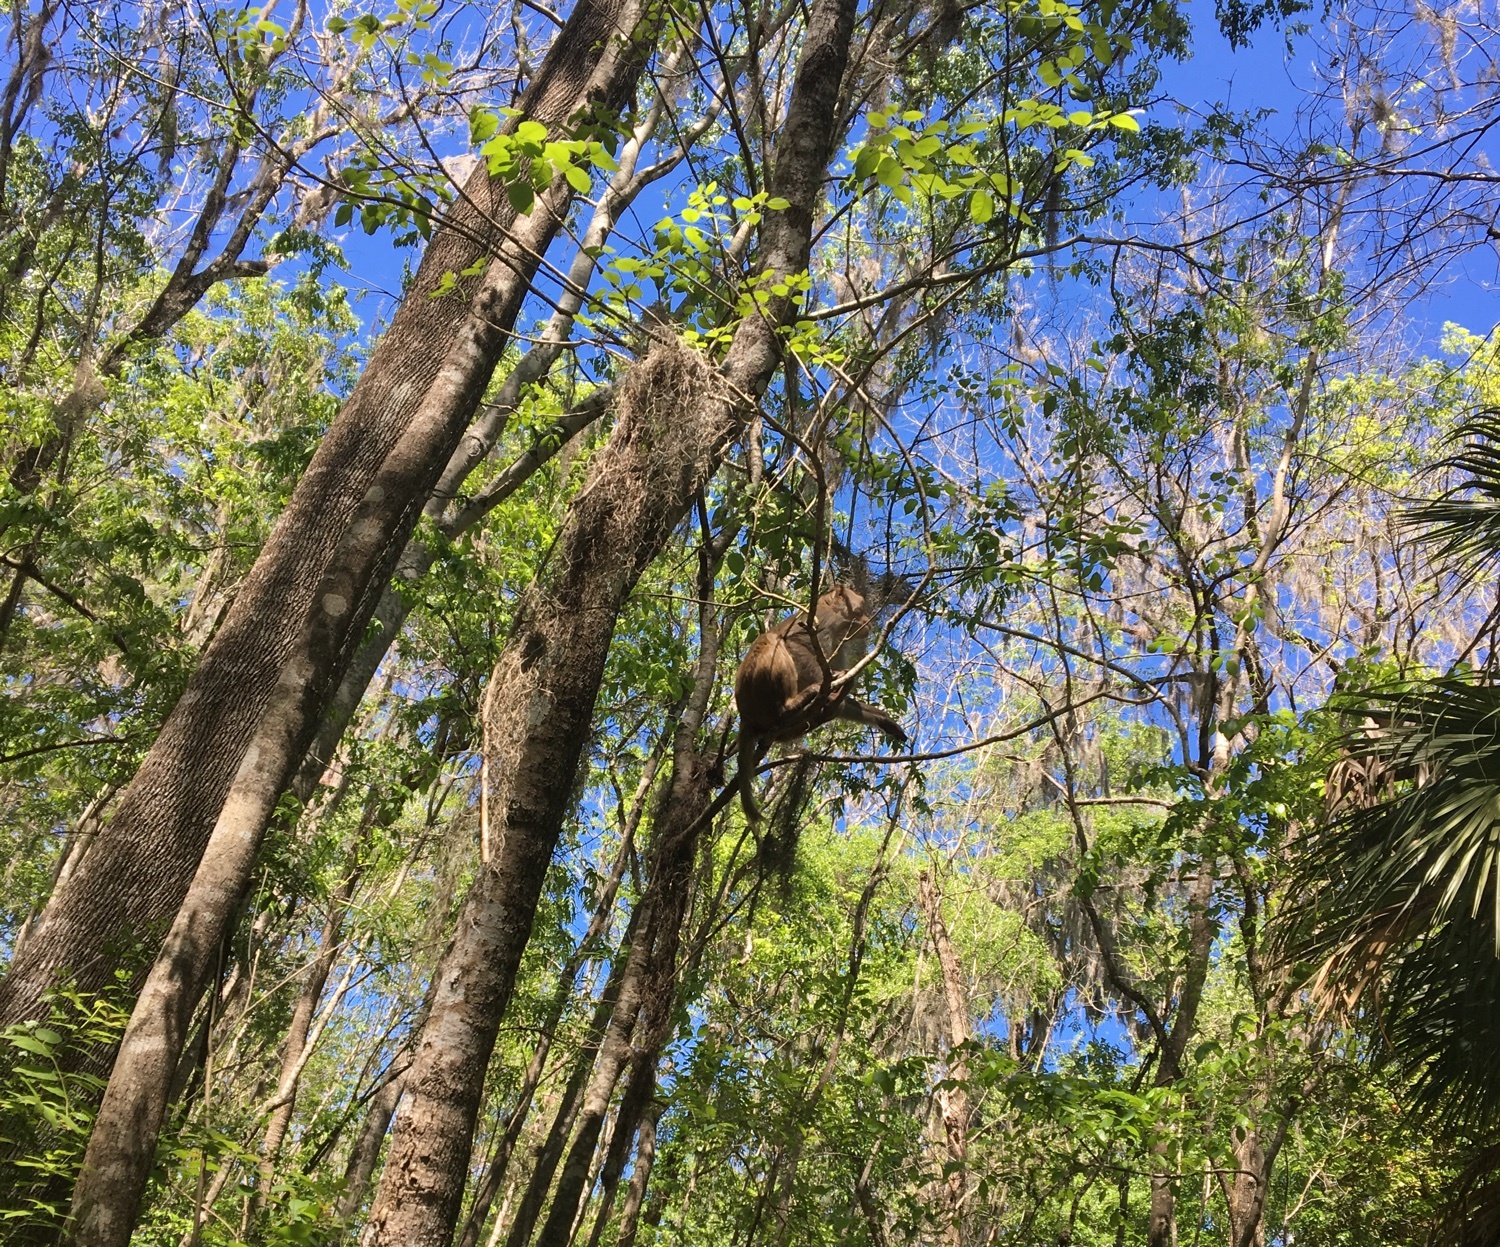 kayaking with monkeys at silver springs state park